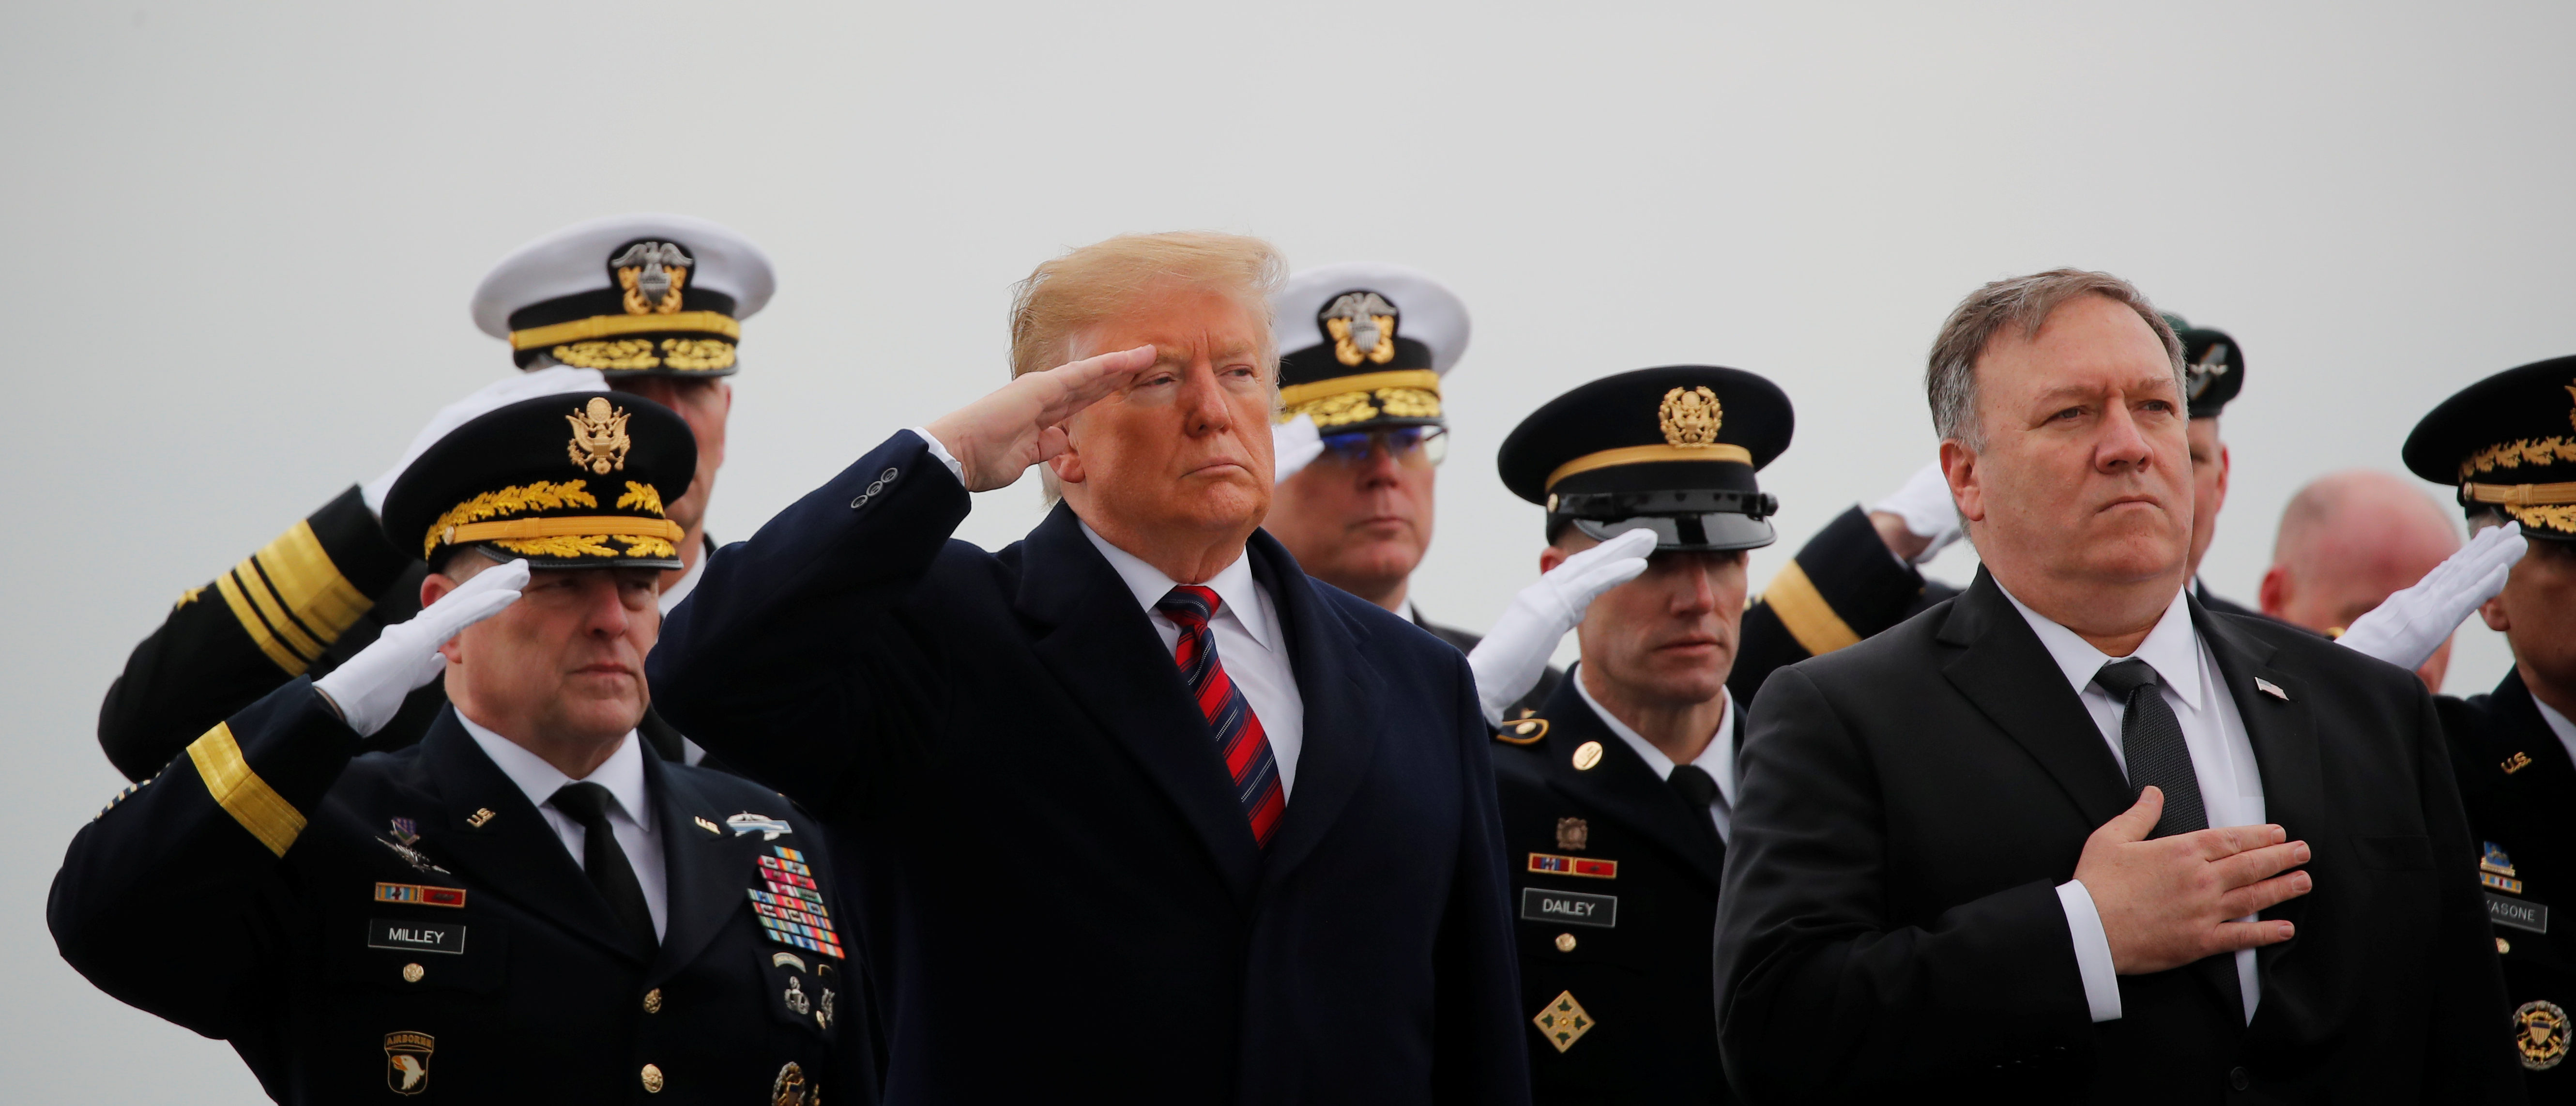 Trump, Pompeo Greet The Bodies Of Fallen Americans | The Daily Caller